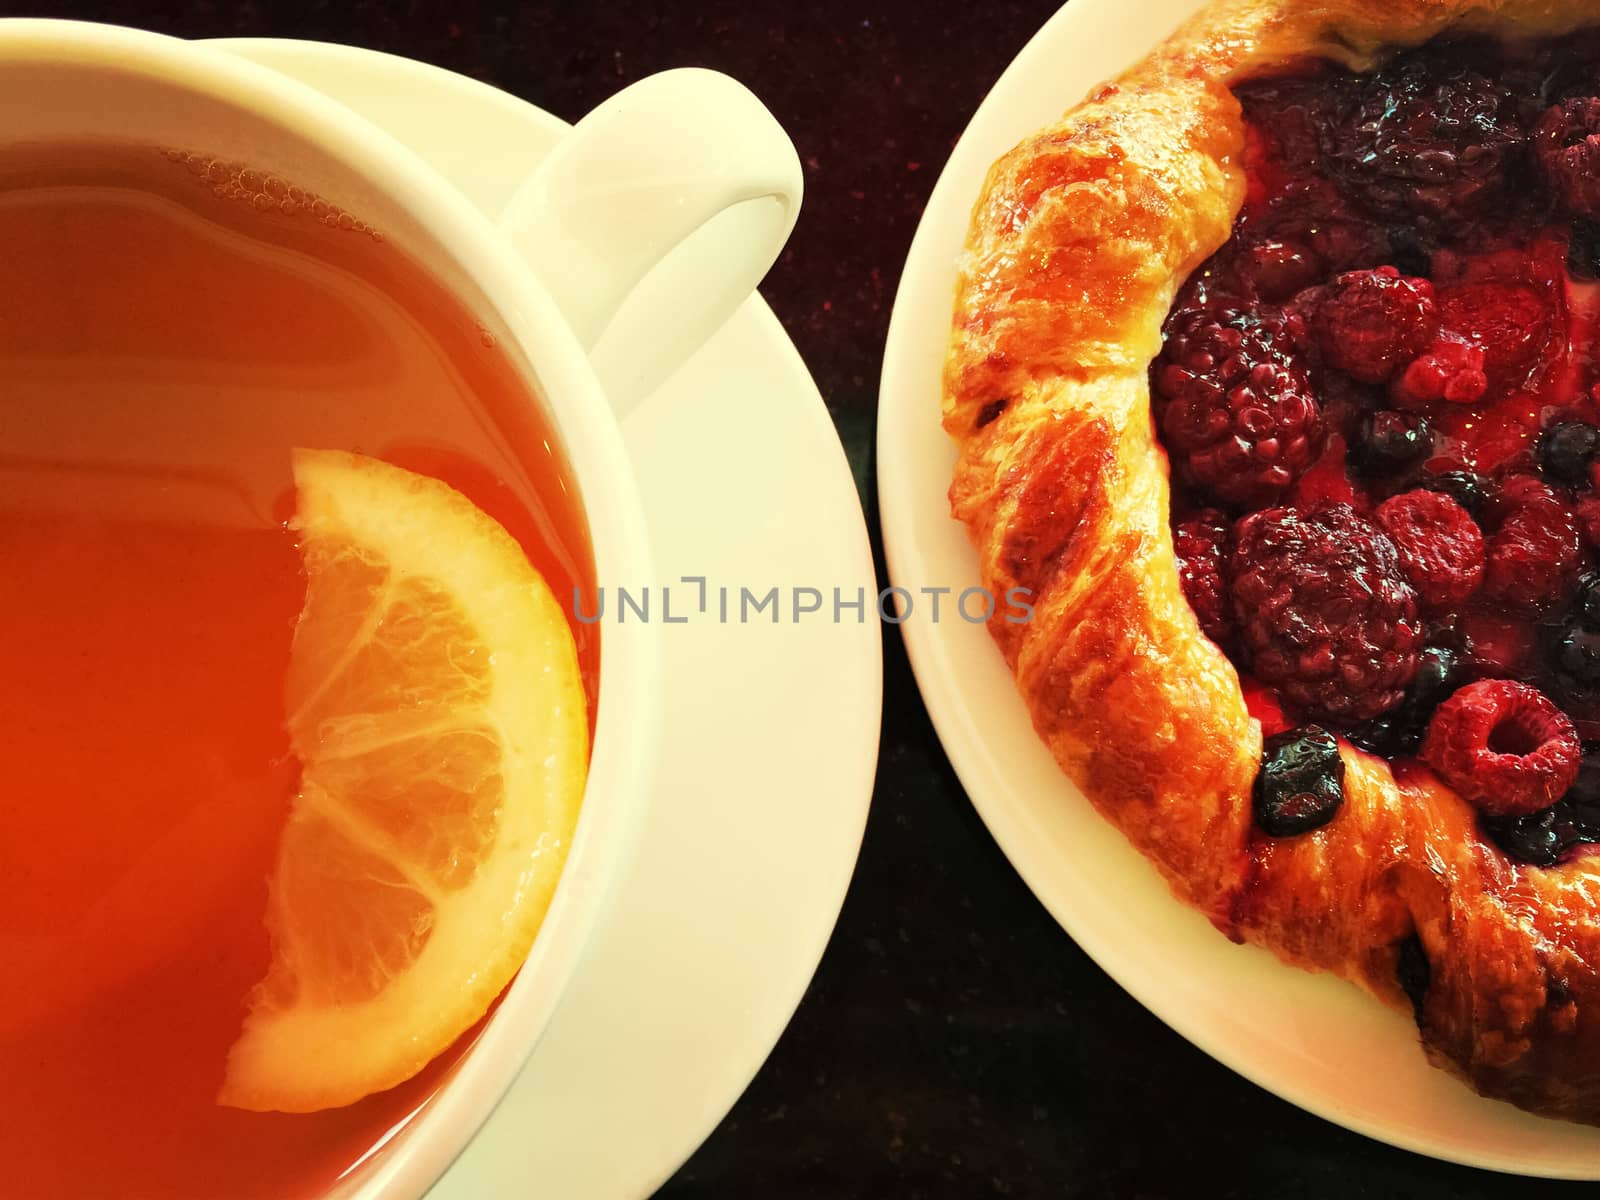 Cup of tea with raspberry pastry by anikasalsera